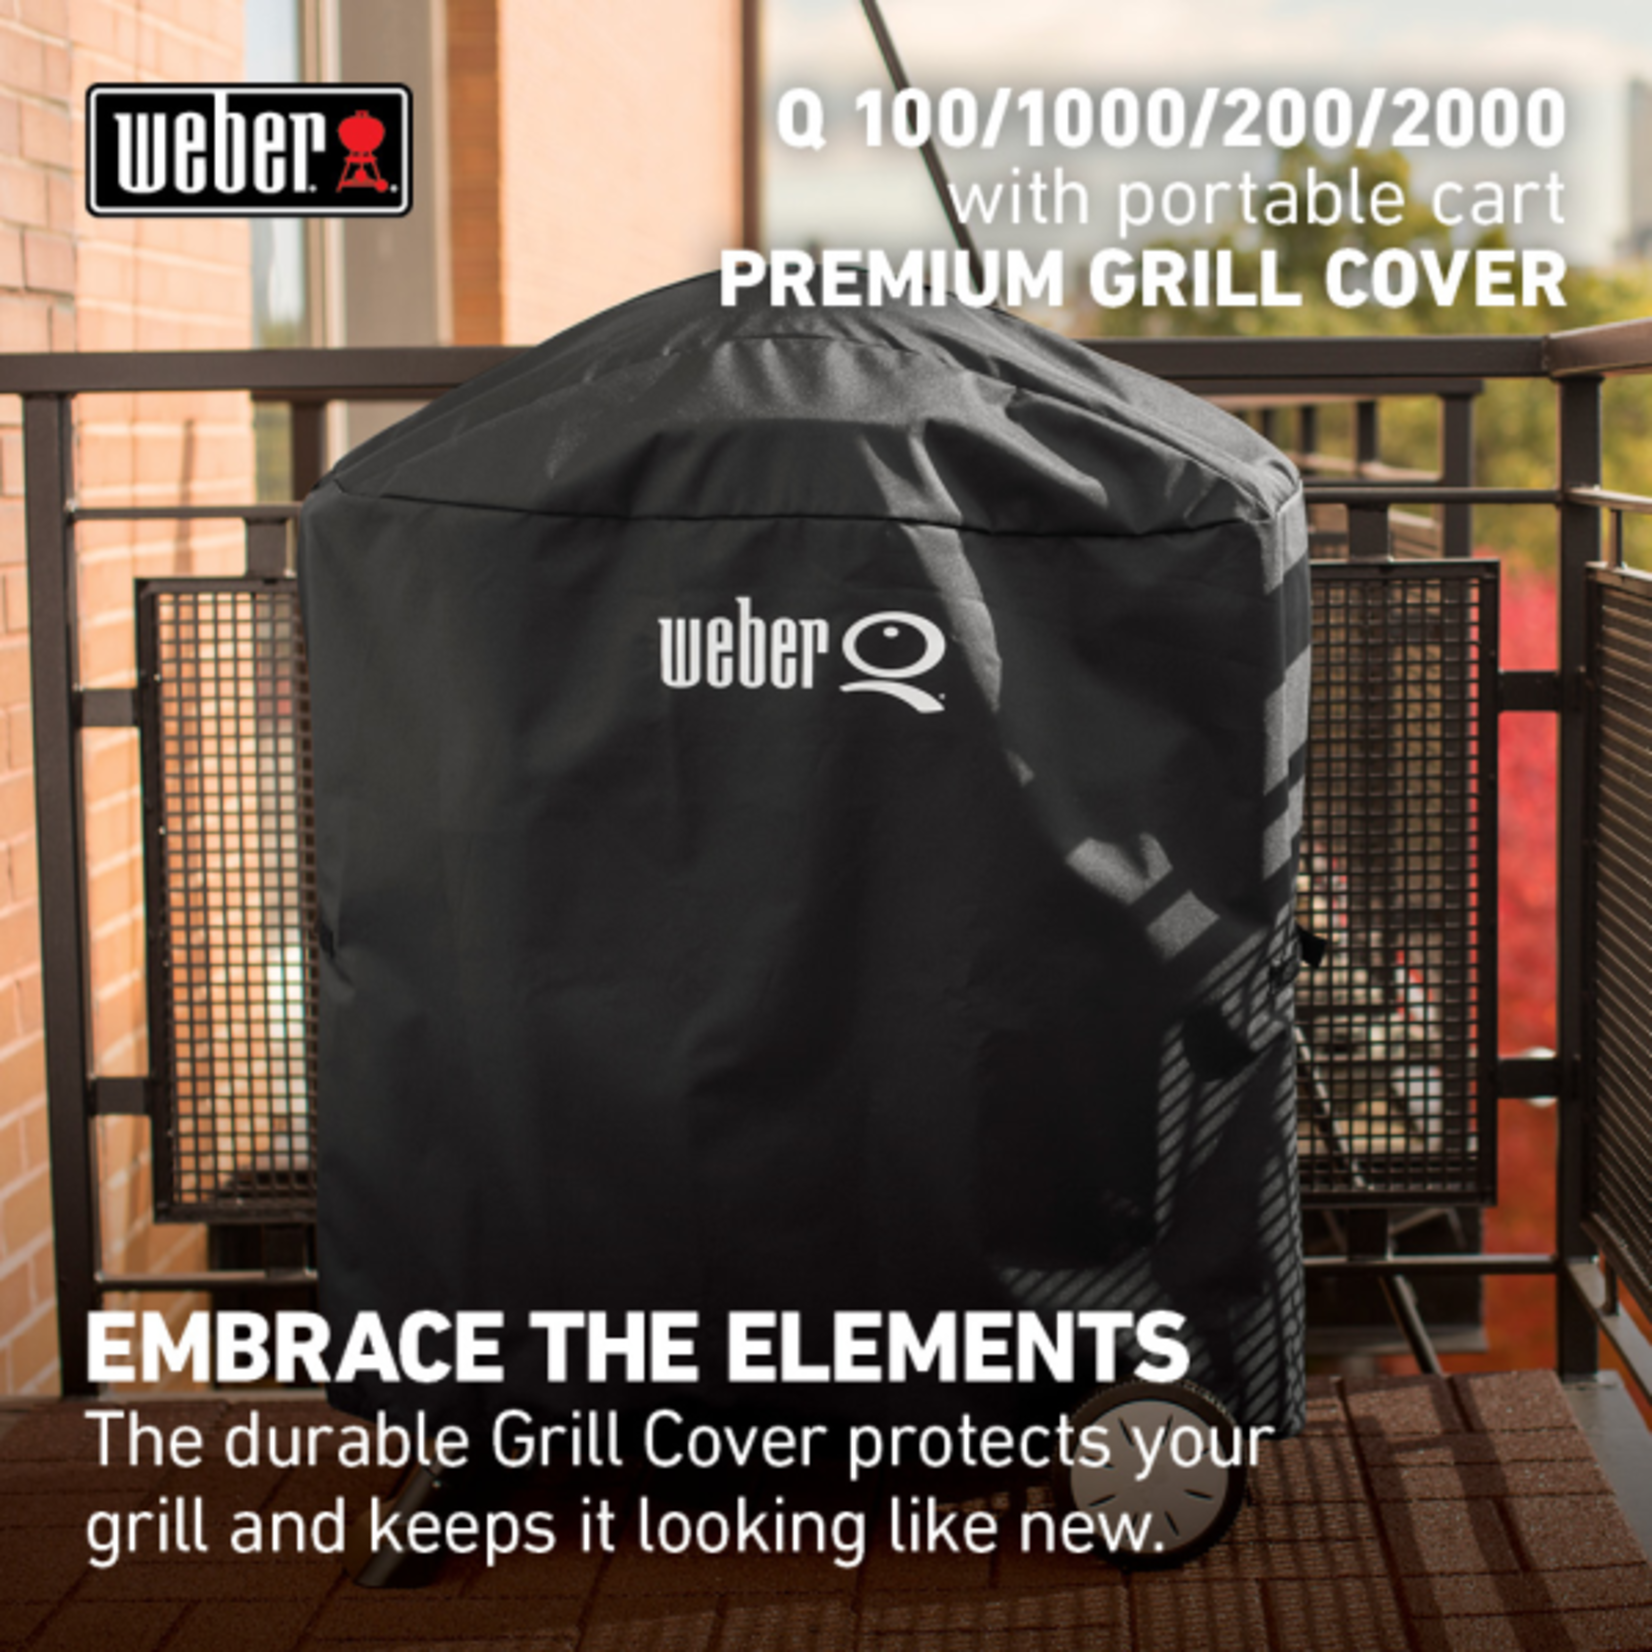 Weber Premium Grill Cover - Fits Q 100/1000, 200/2000 with portable cart